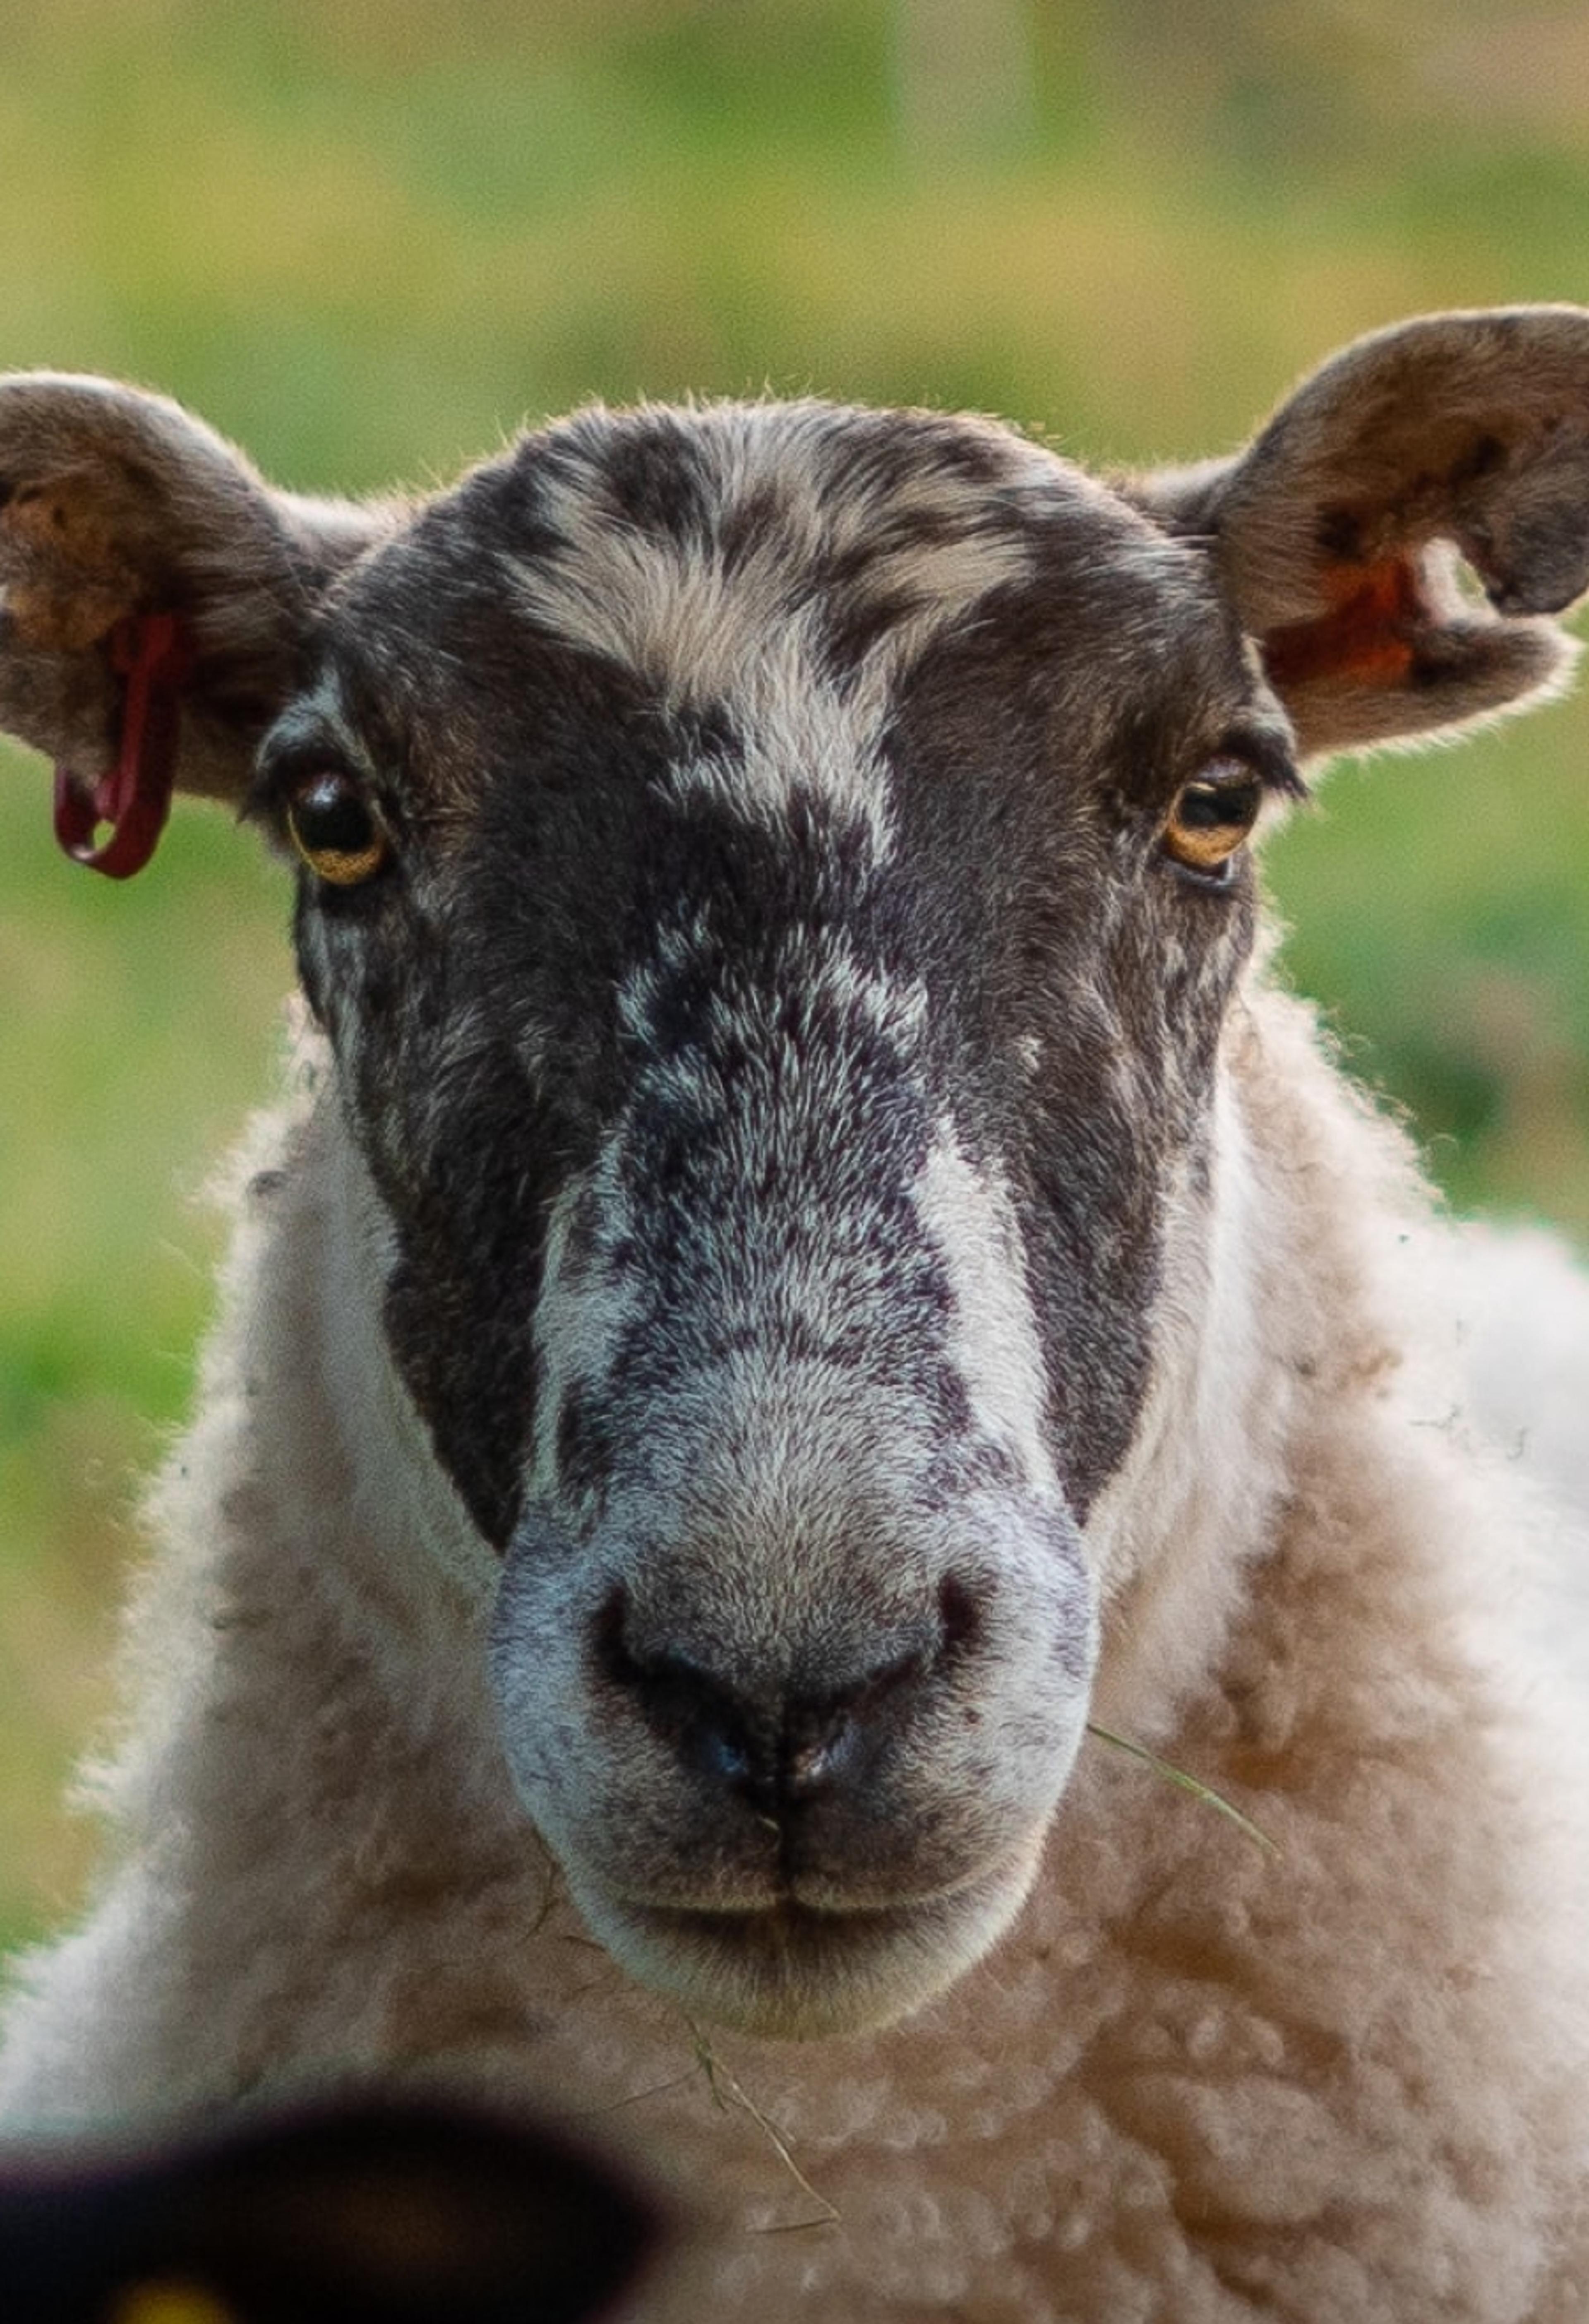 A sheep with a black and white head and a white coat looking directly into the camera.